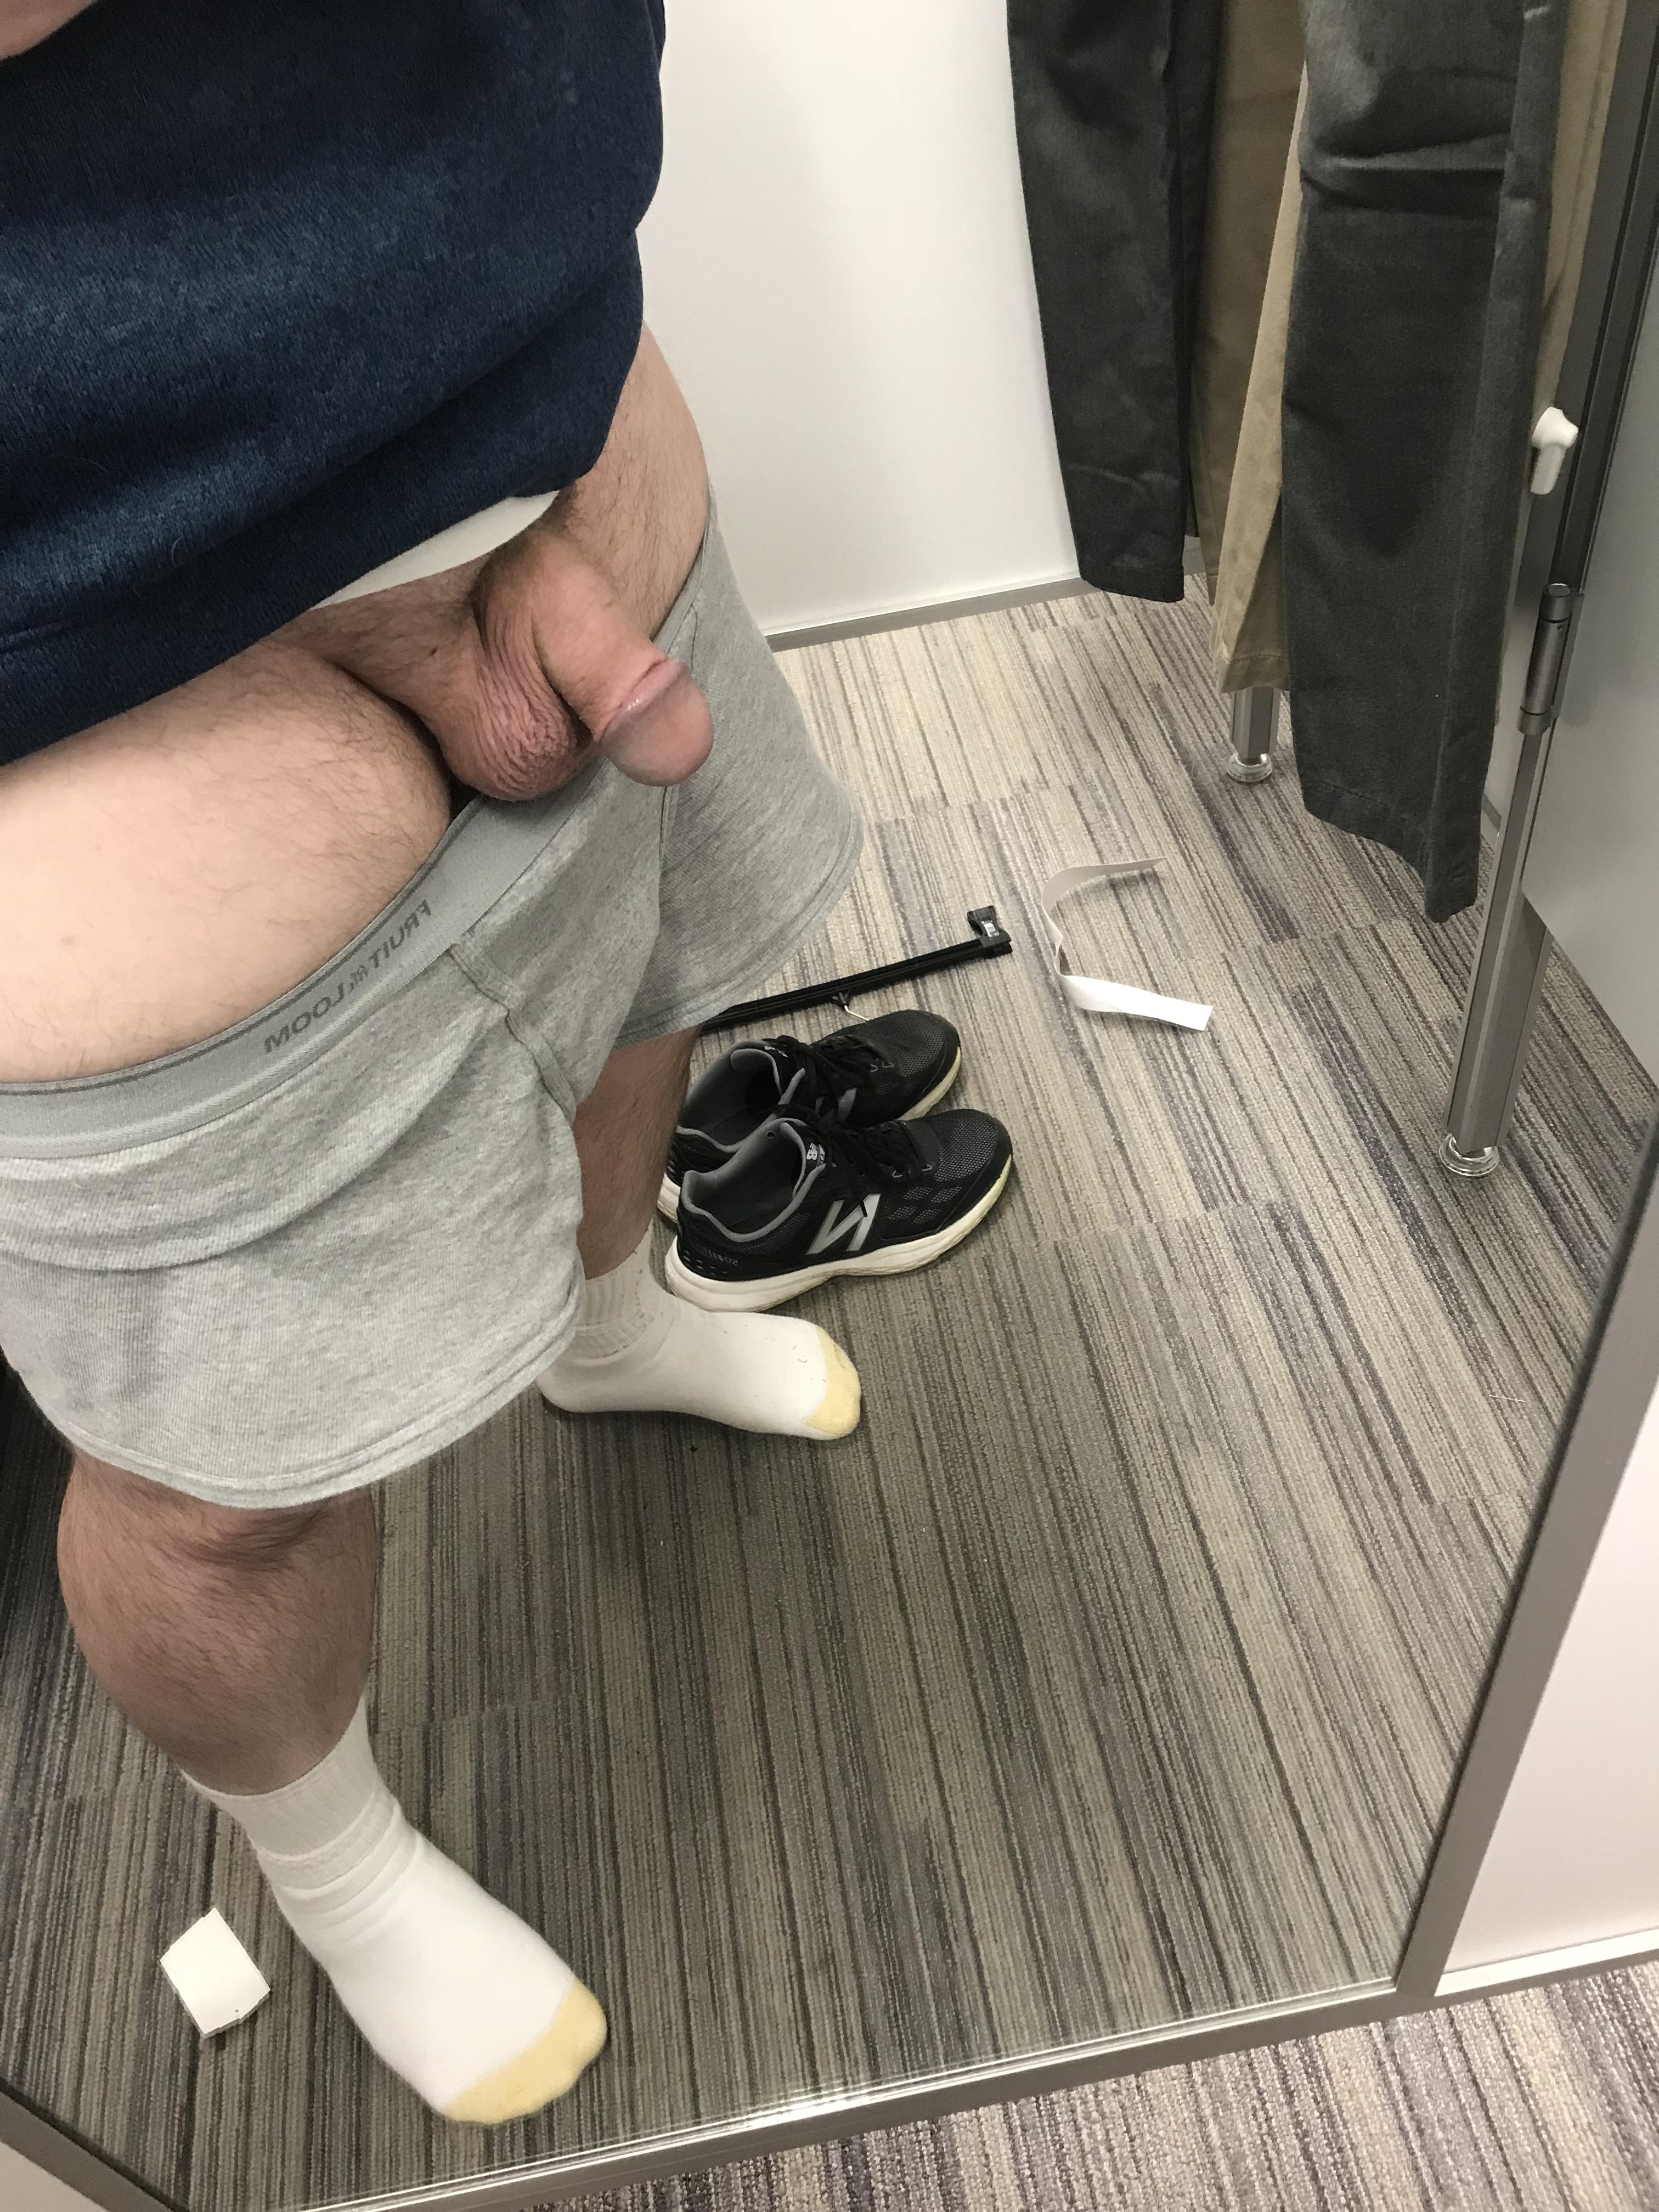 Out shopping for new pants. Wouldn’t mind a changing room BJ.